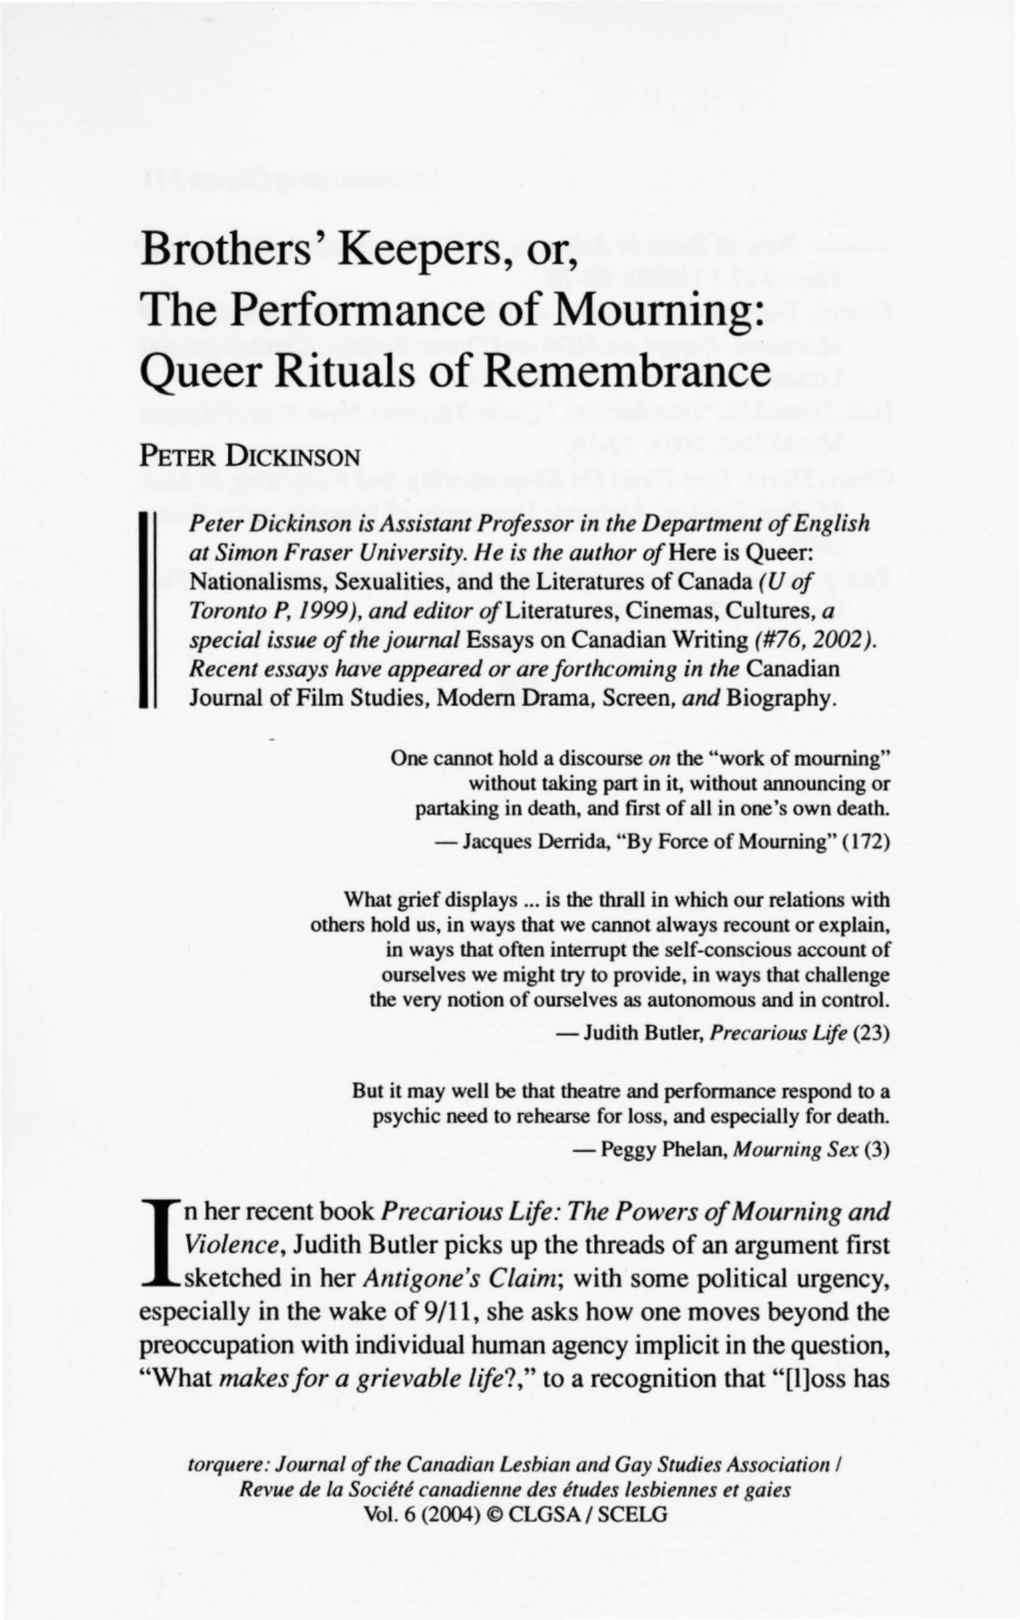 Queer Rituals of Remembrance